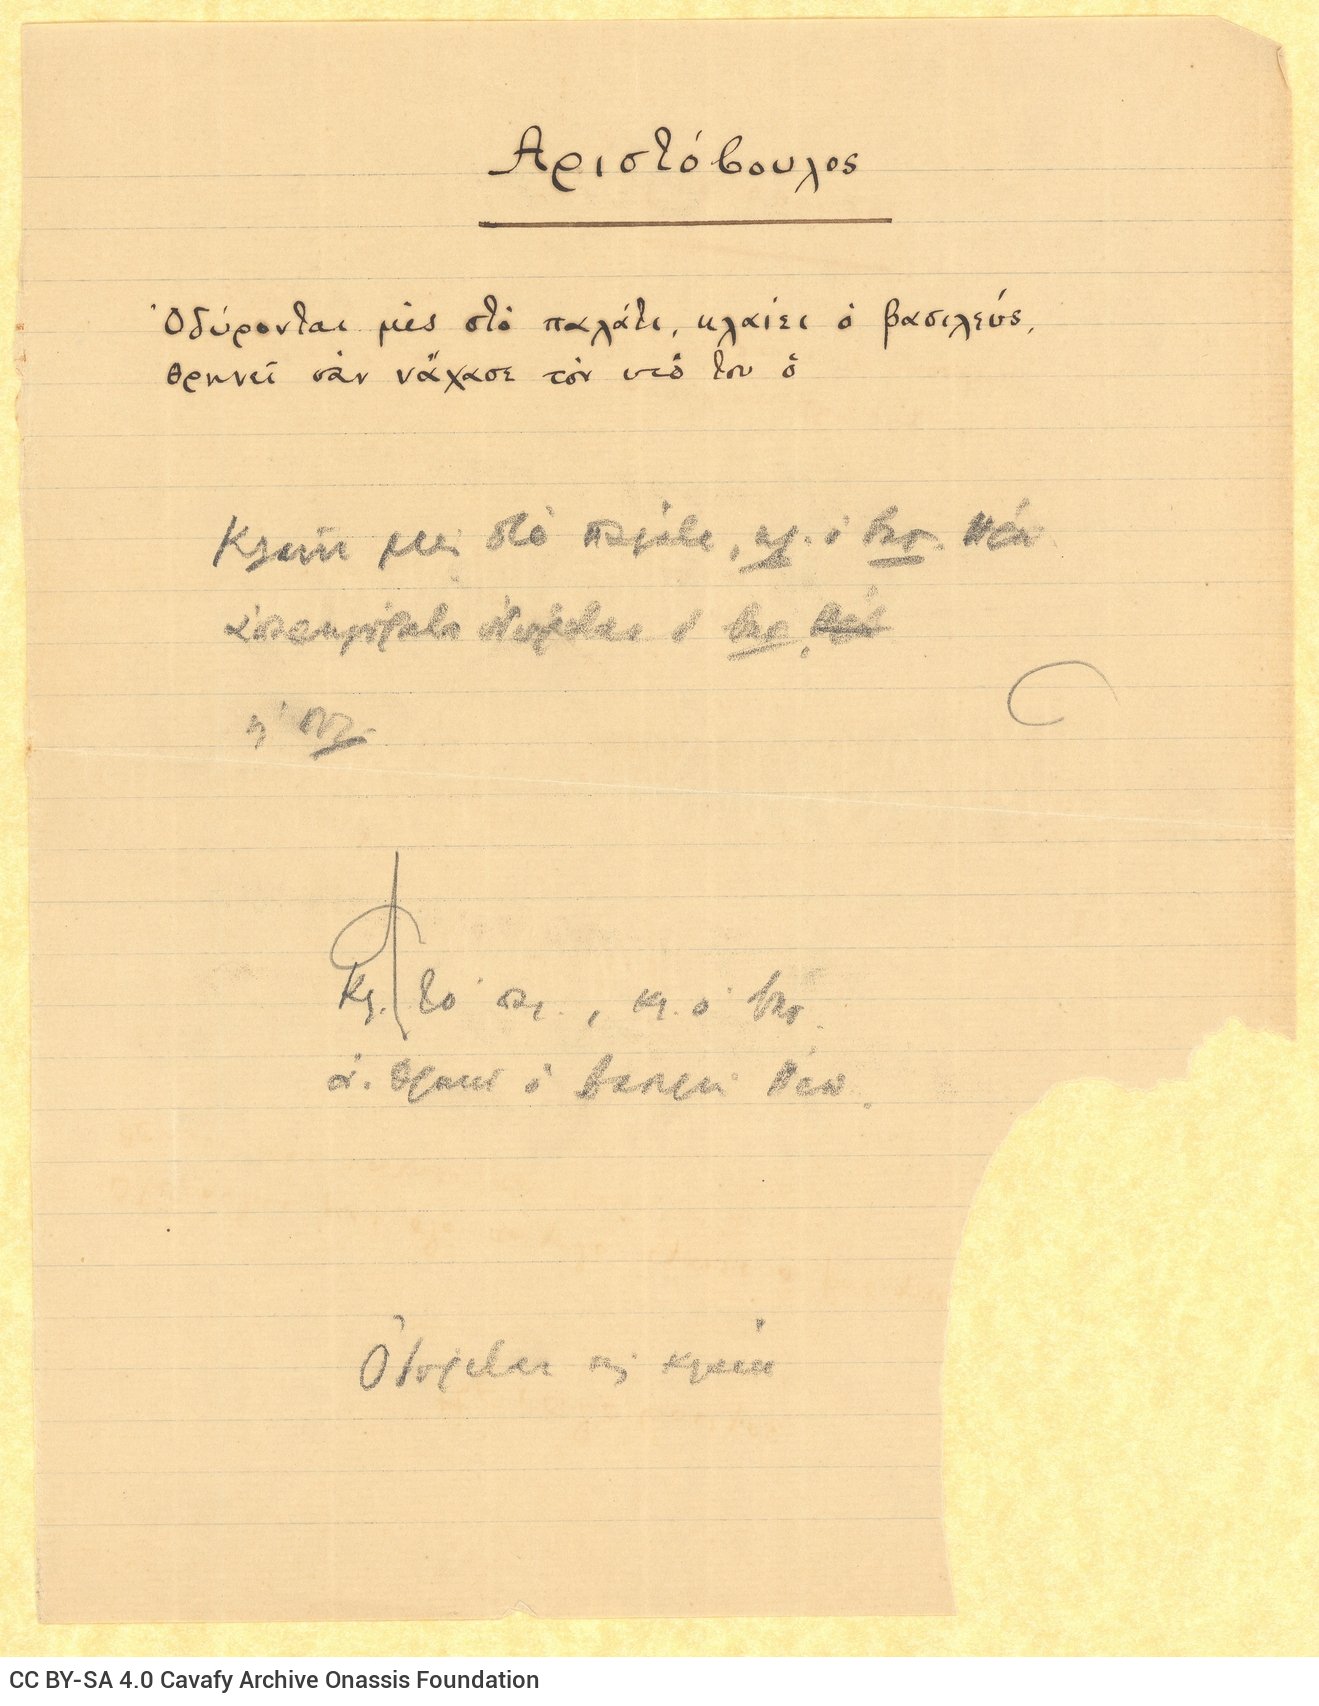 Handwritten poem "Aristobulus" on the first two pages of a double sheet notepaper. Cancellations and emendations. The four